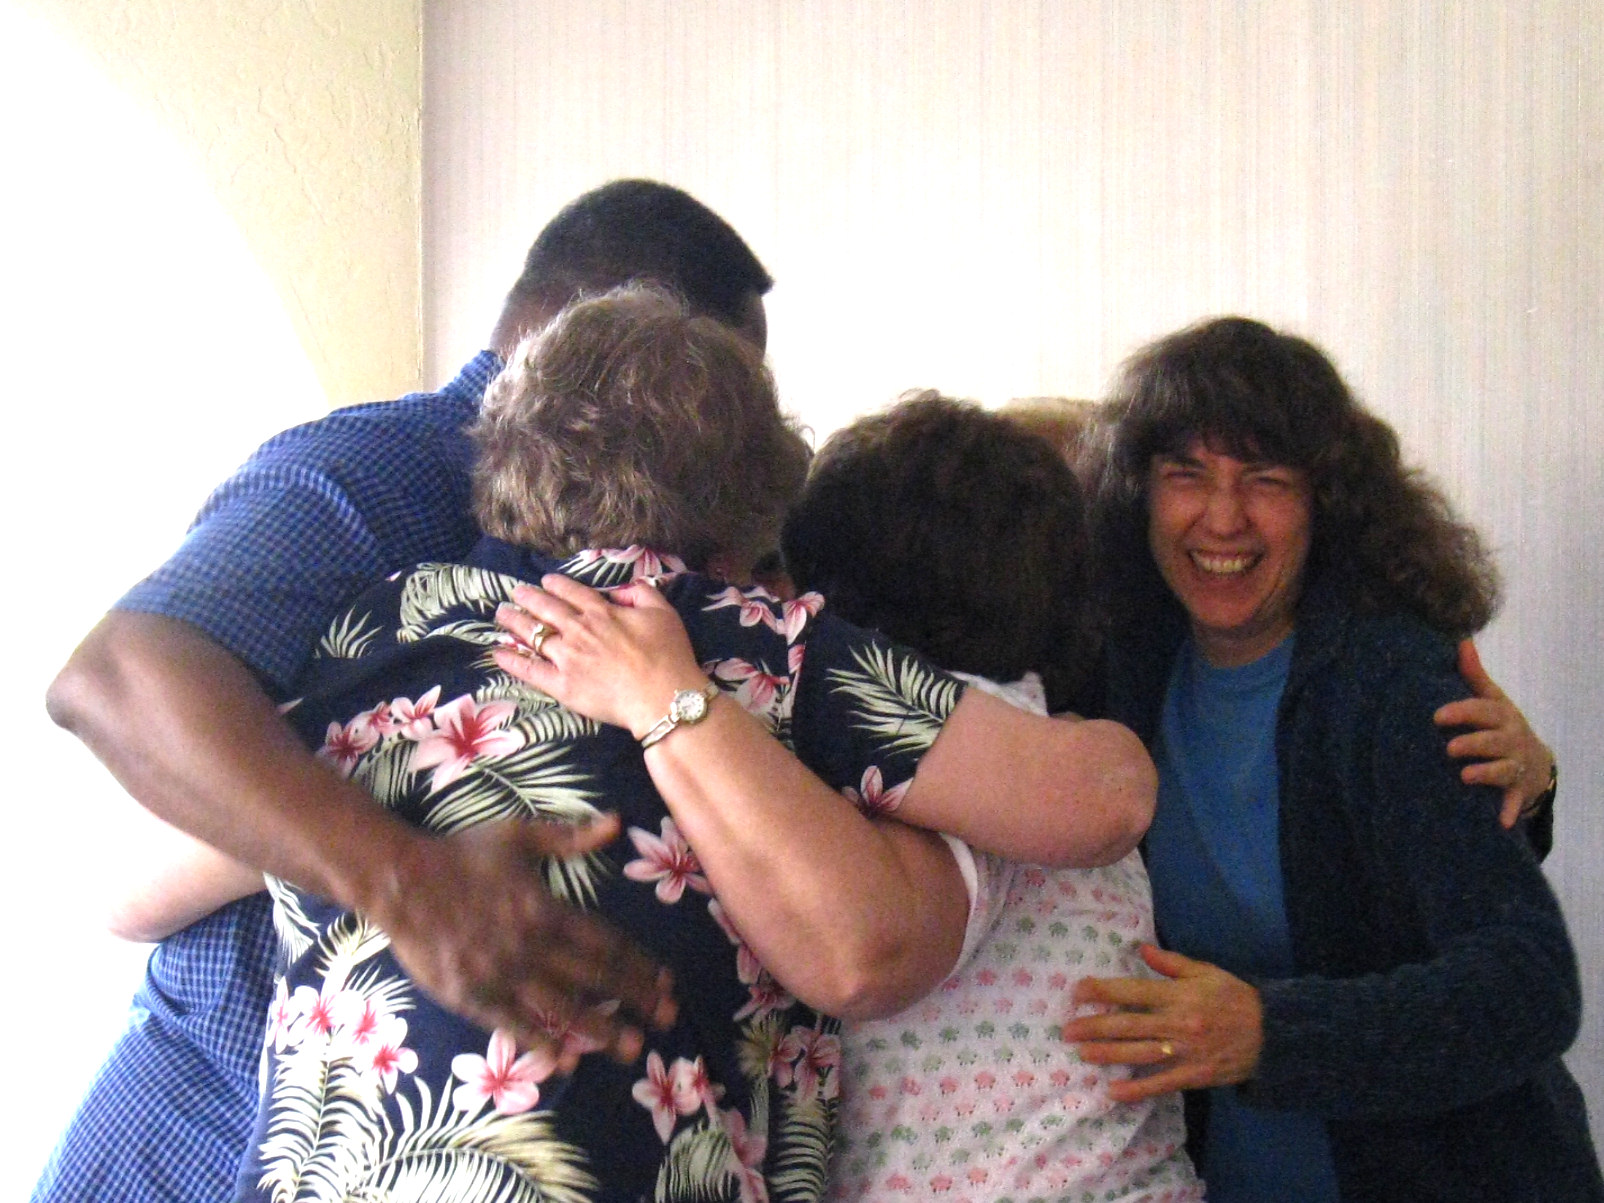 4 people in a group hug. All are facing inward, one facing the camera with a huge smile